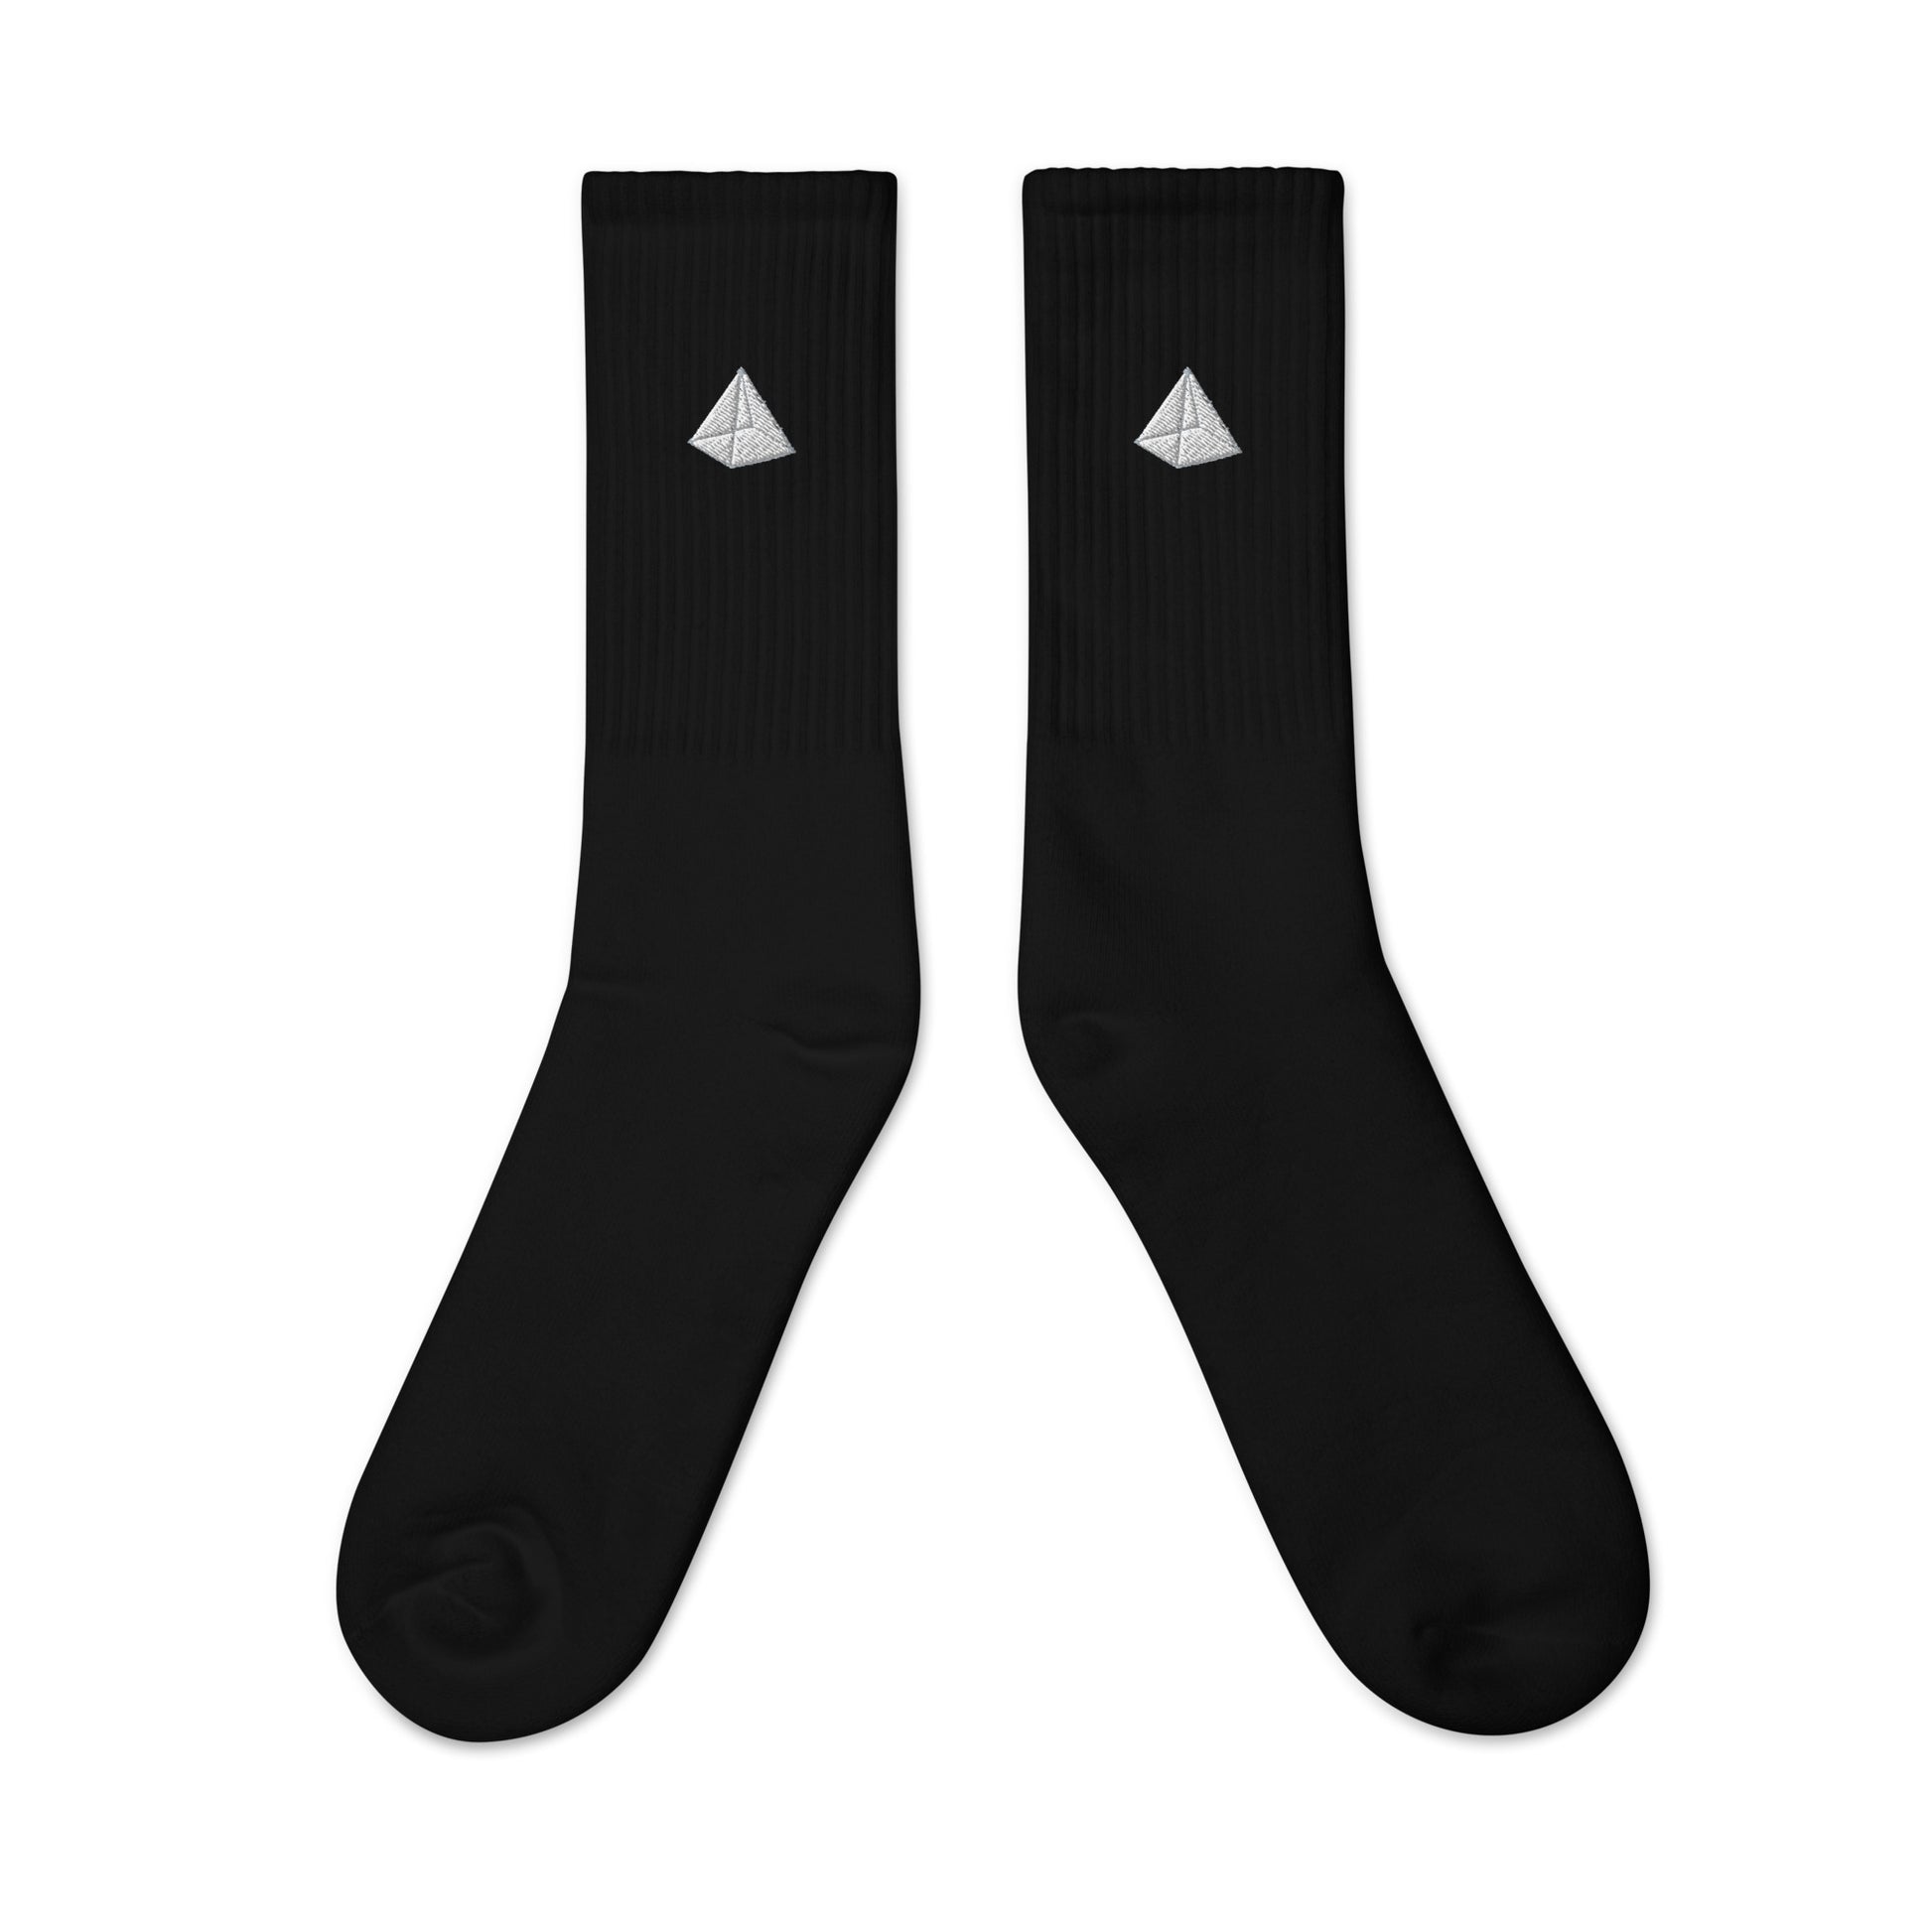 socks-from-the-front-with-pyramid-symbol